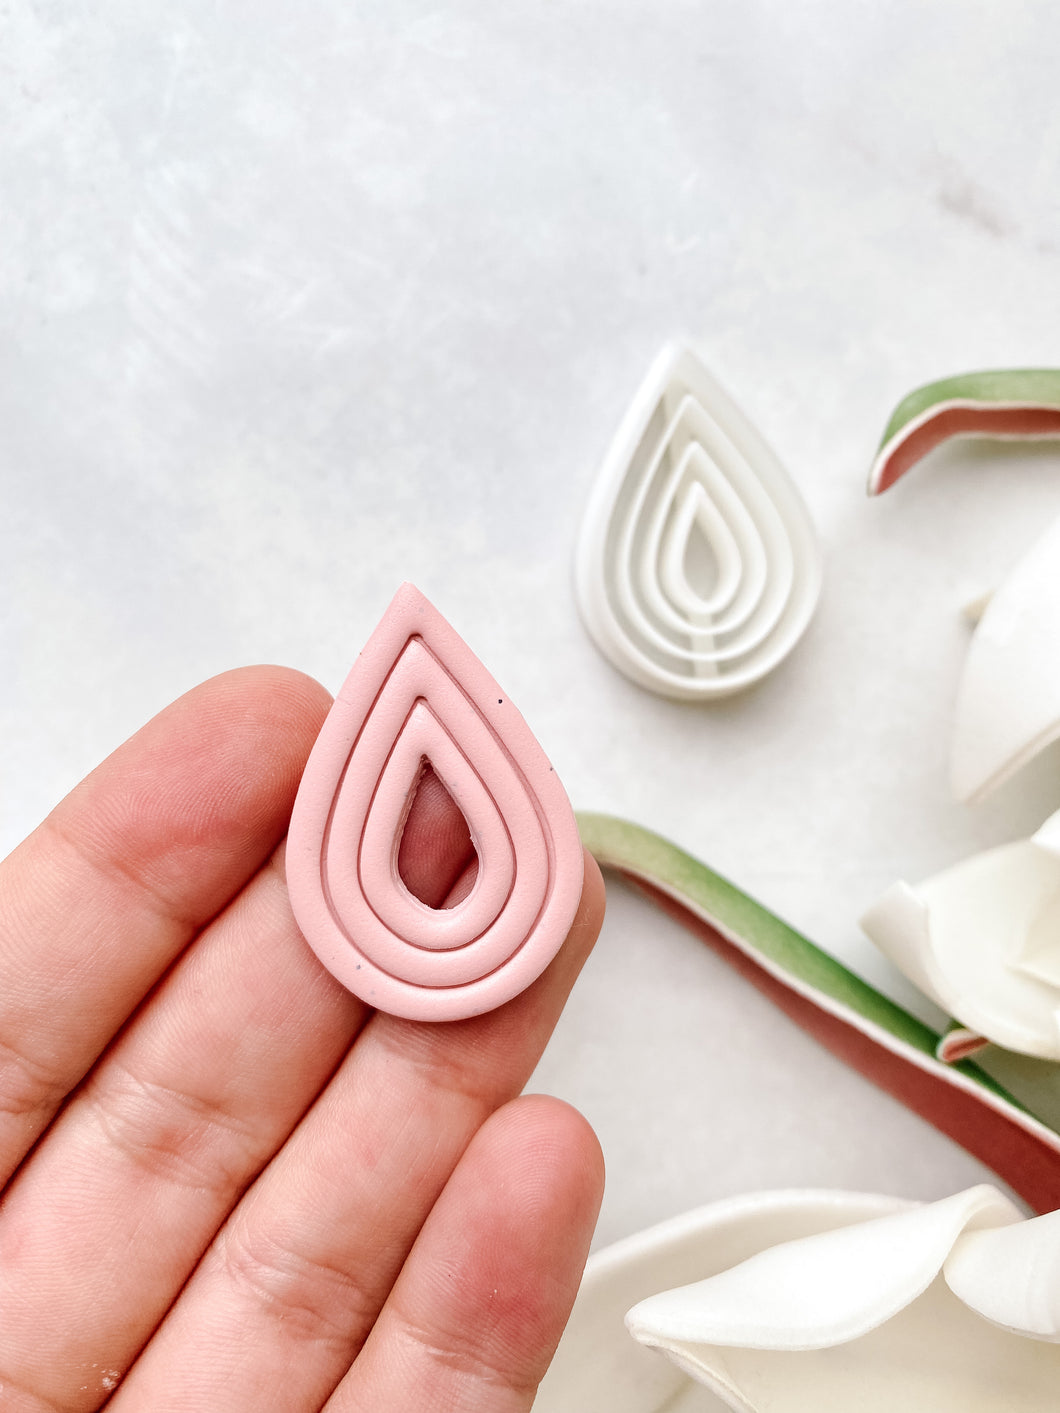 Extruded Teardrop Polymer Clay Cutter